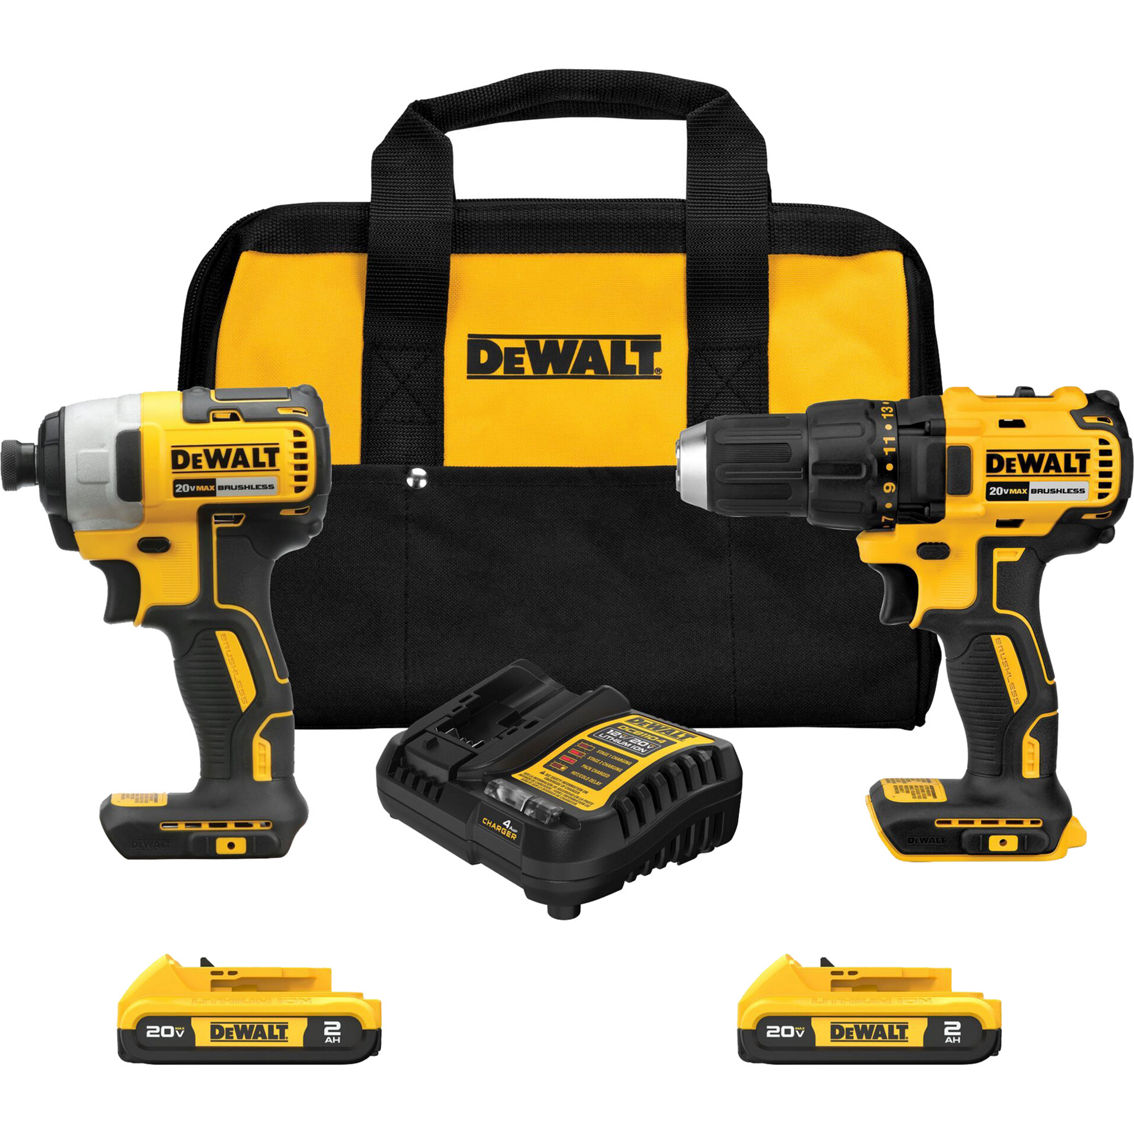 DeWalt 20V MAX 1.5 Ah Lithium Ion Compact Brushless Drill and Impact Driver Kit - Image 1 of 4